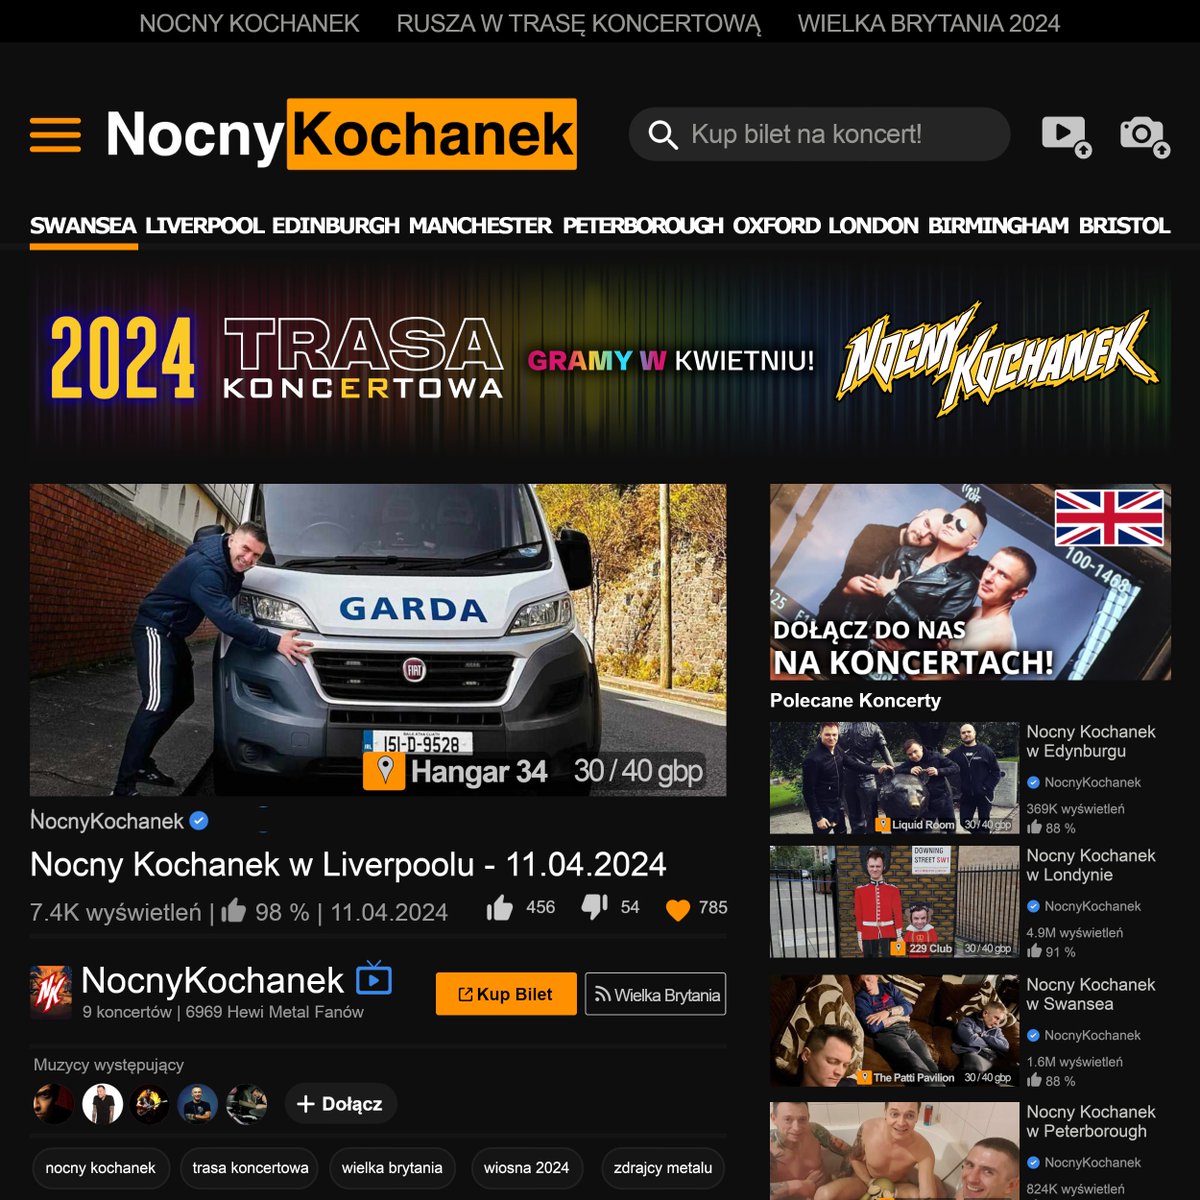 Tickets are now ON SALE for Nocny Kochanek LIVERPOOL date Grab your tickets now: t.ly/xNWmG